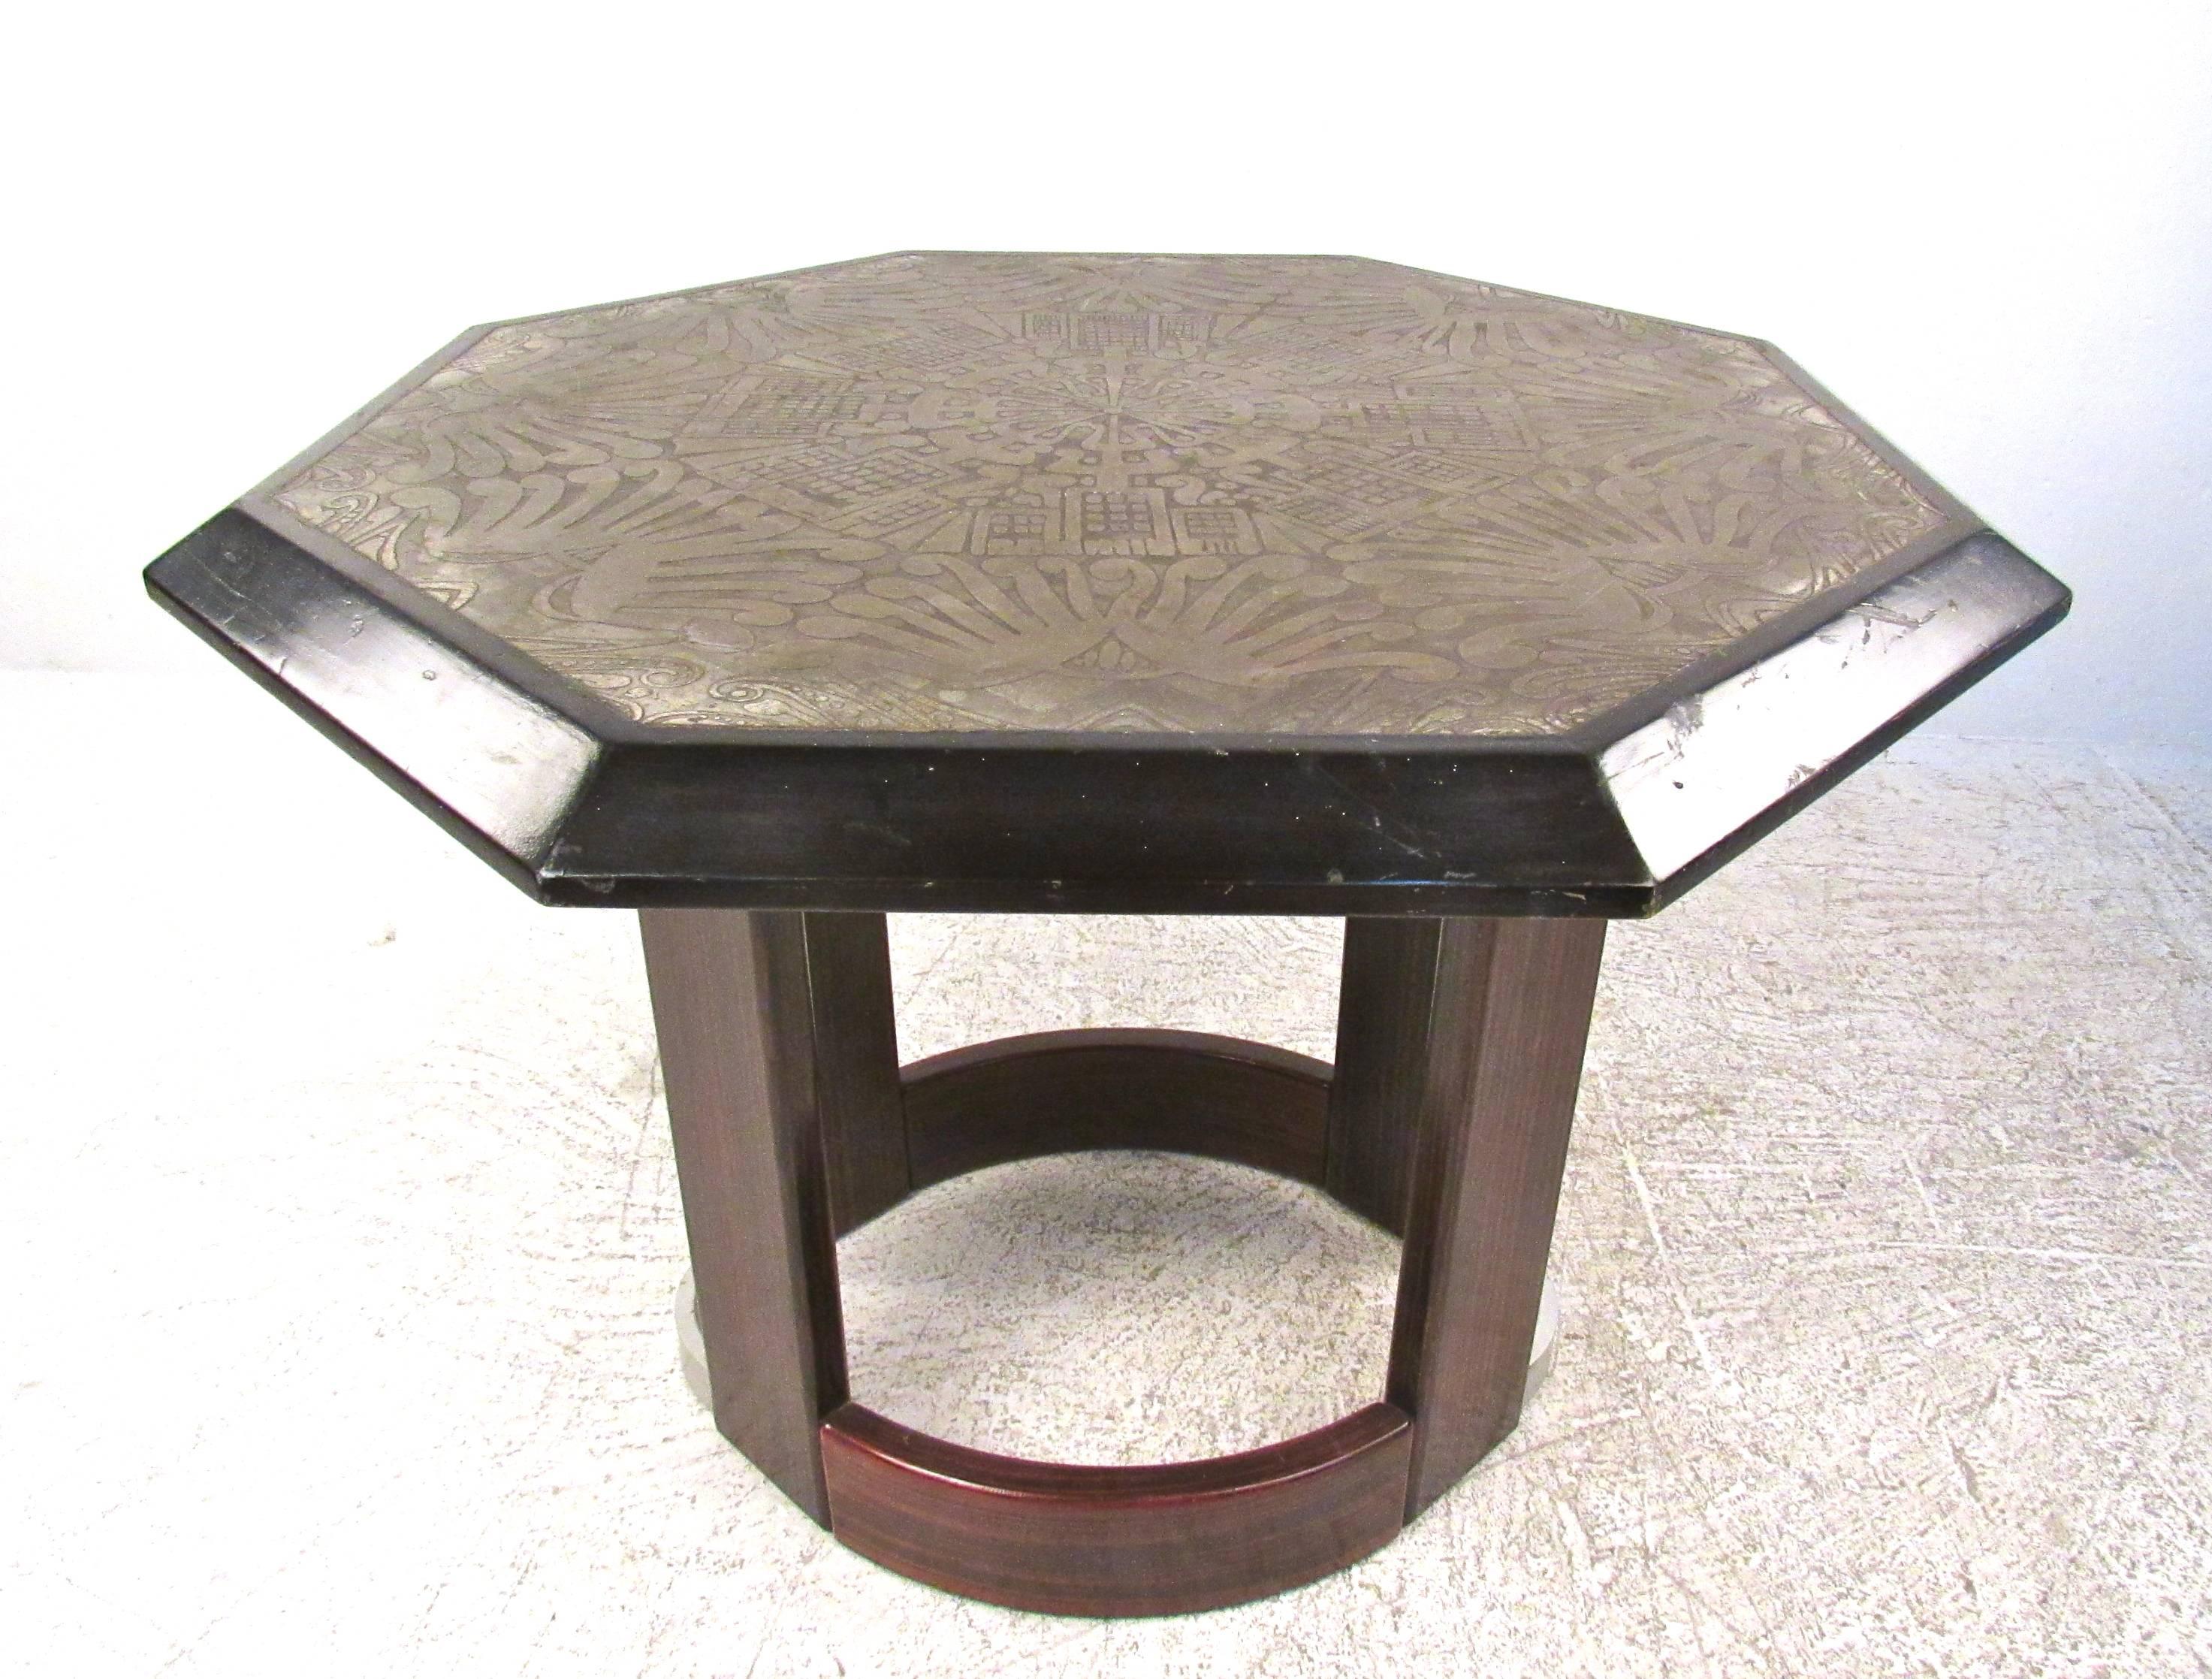 This unique Italian table features an impressive raised design top with unique design. Whether on display in the foyer, sitting room, or entryway this octagonal center table with stylish pedestal base makes an impressive addition to any setting.